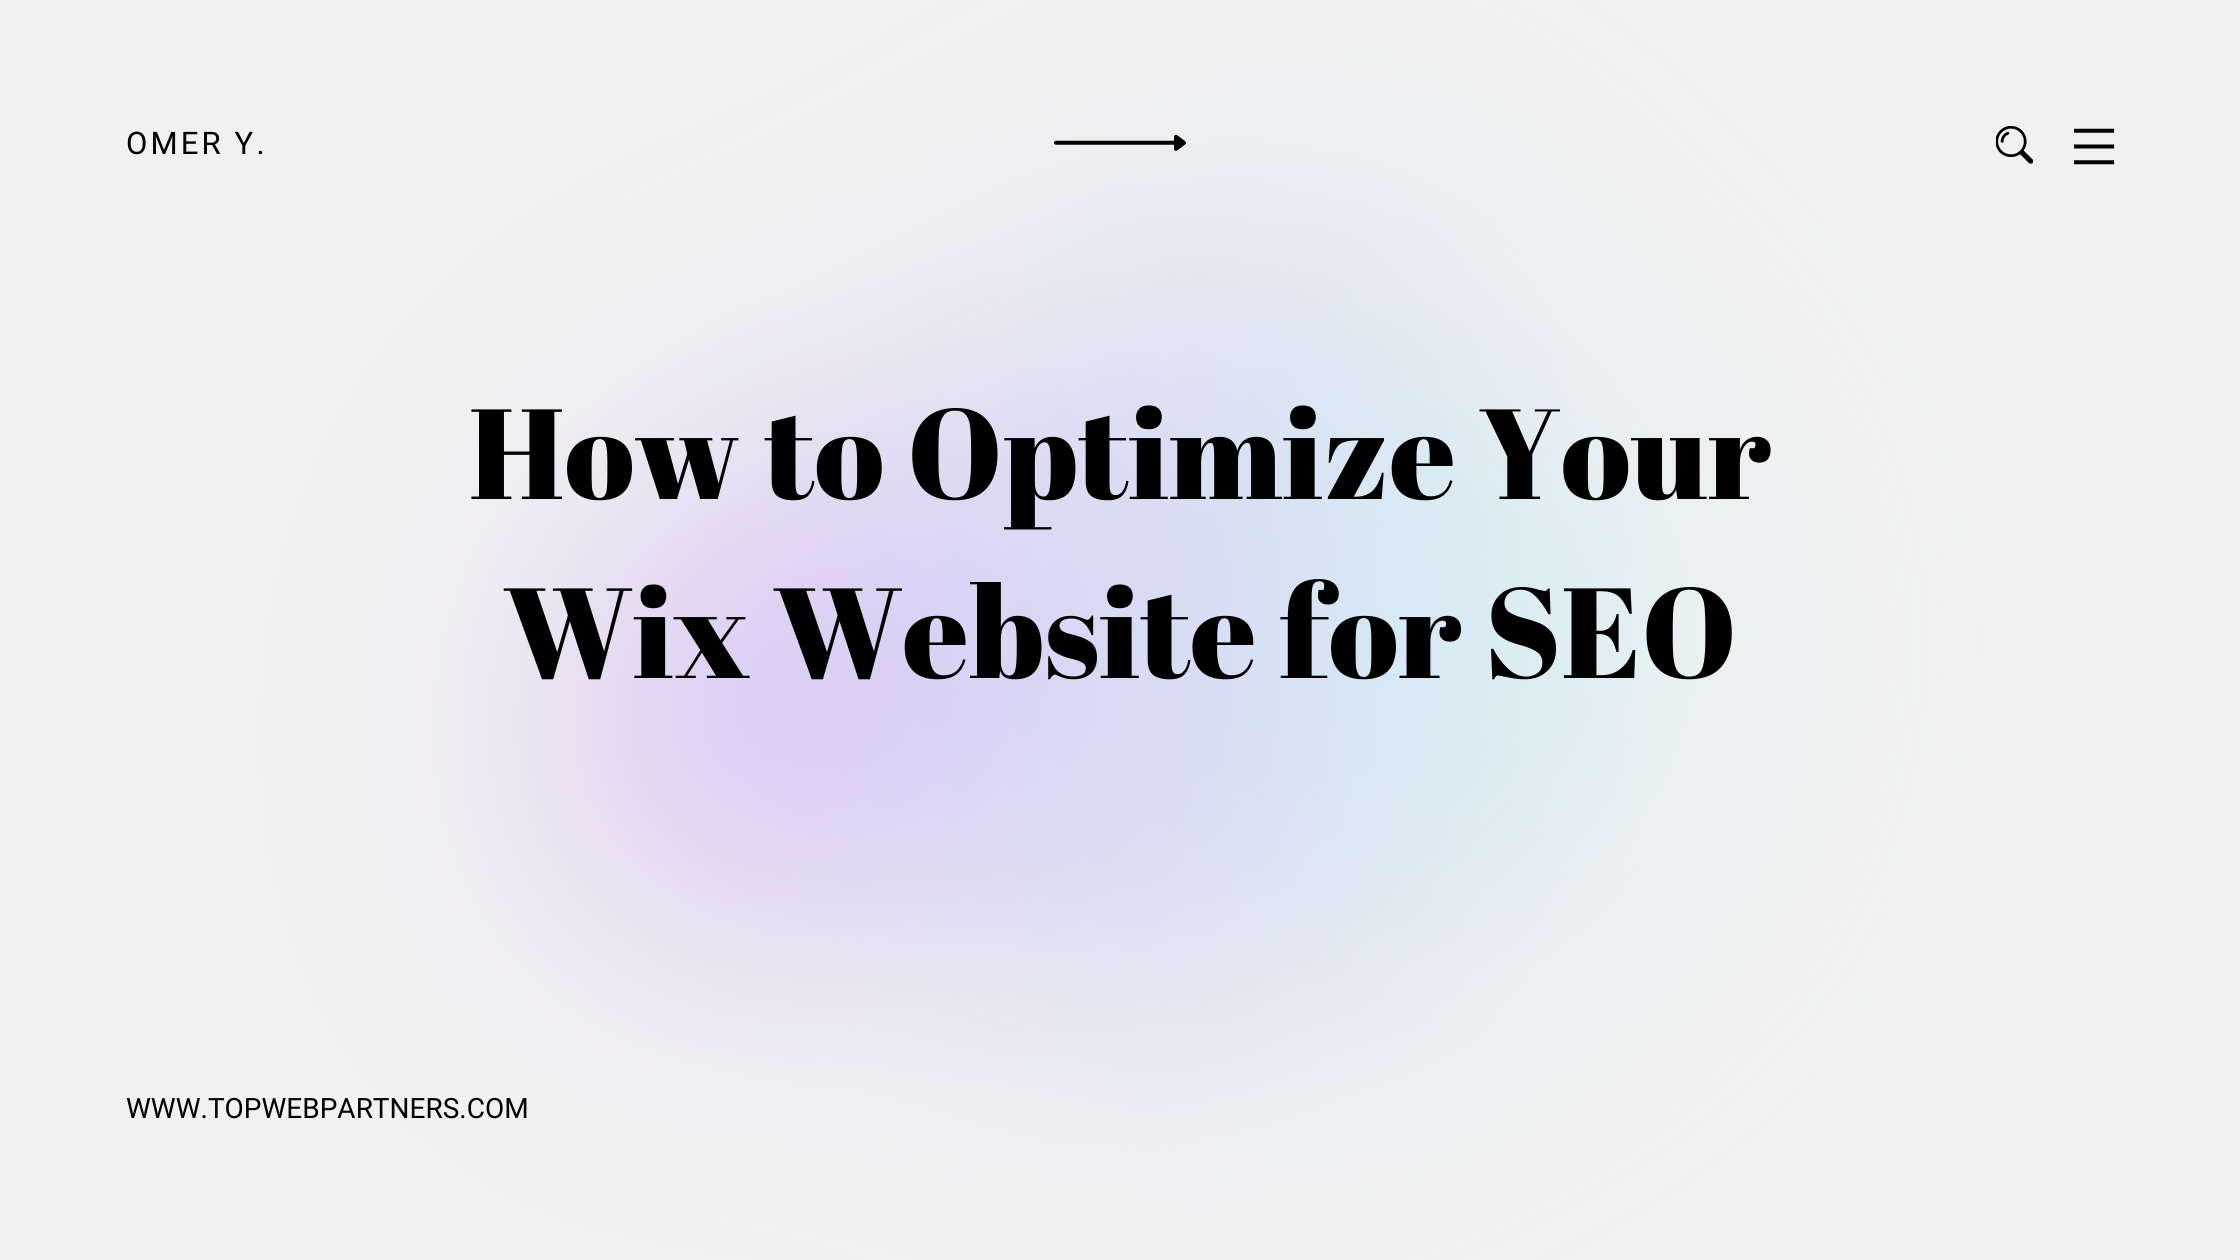 How to Optimize Your Wix Website for SEO